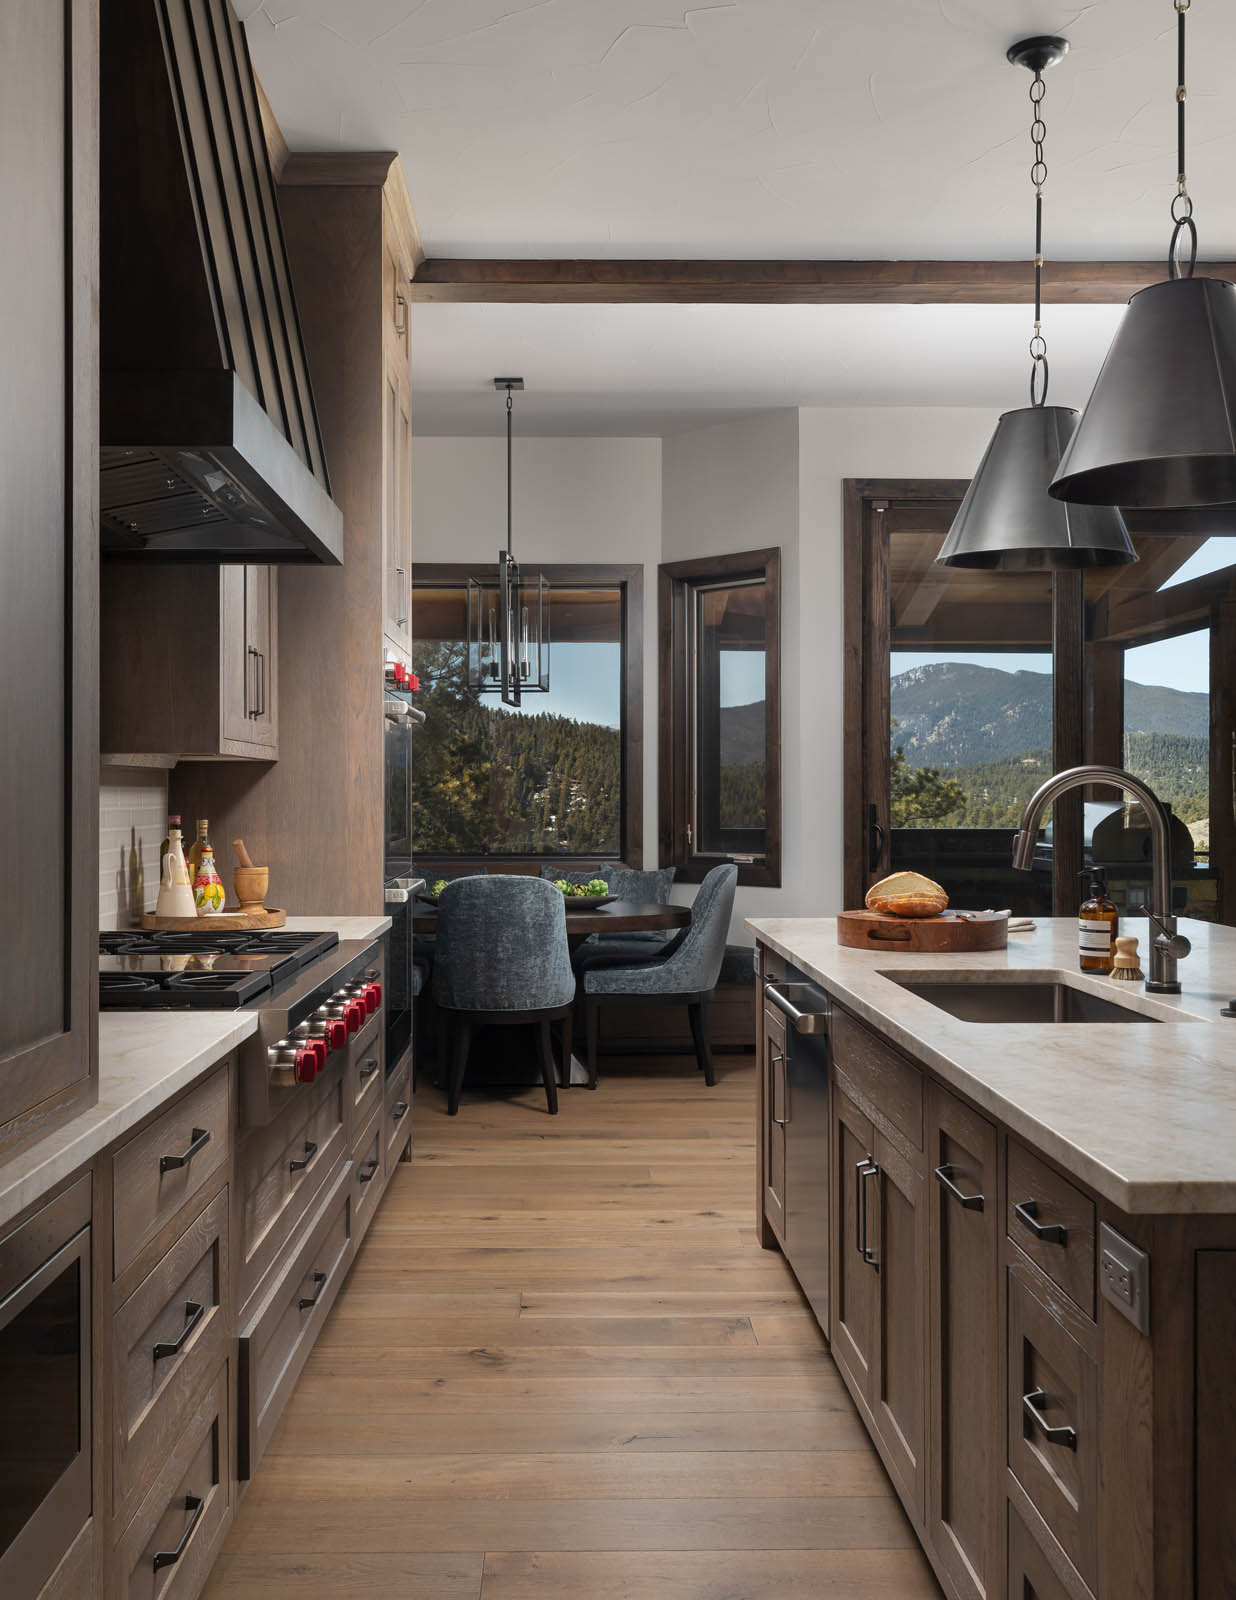 Beautiful kitchen design with mountain range outside the windoes